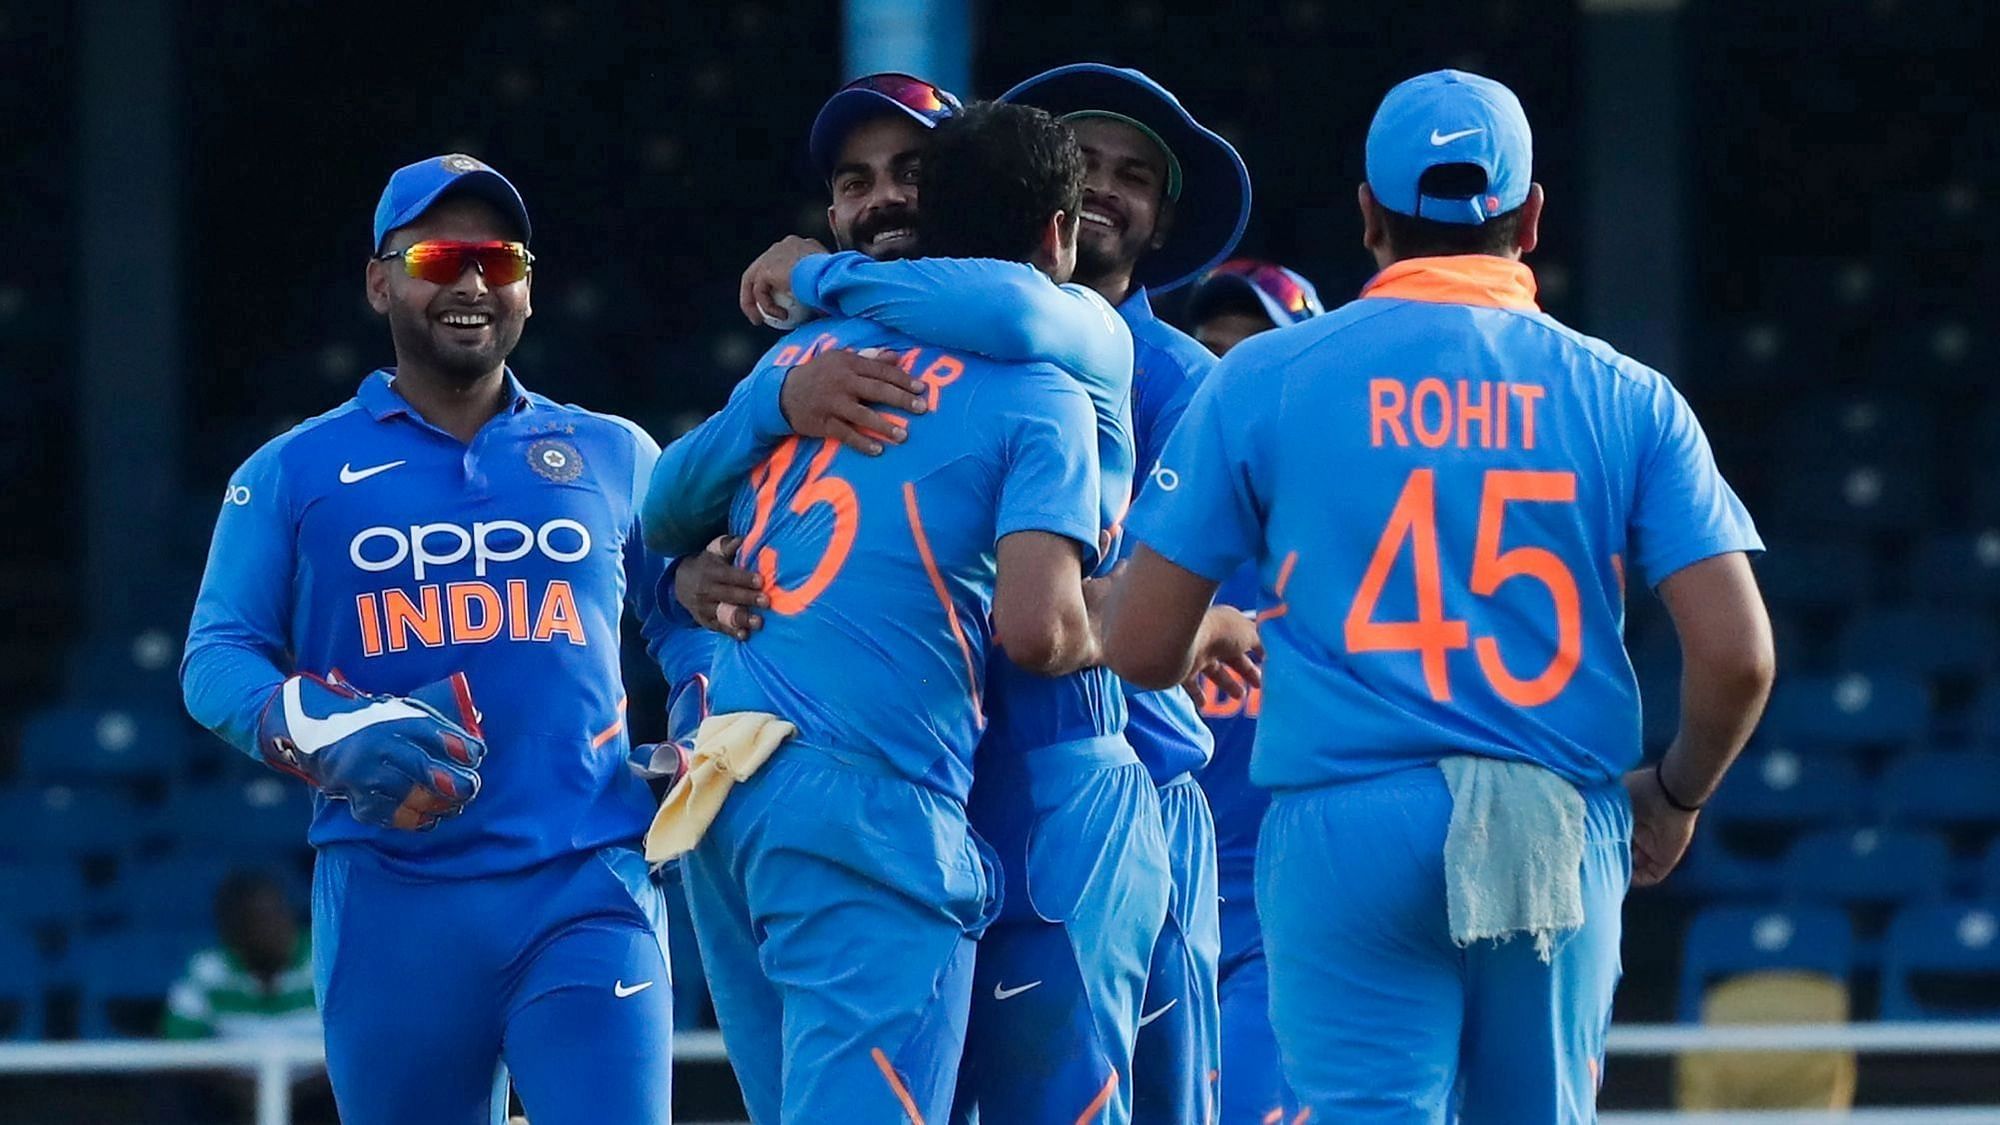 India Vs Australia 3rd T20 Live Streaming IND vs AUS Match Time, Venue, When, Where and How To Watch Match in India Online On Disney+ Hotstar and TV